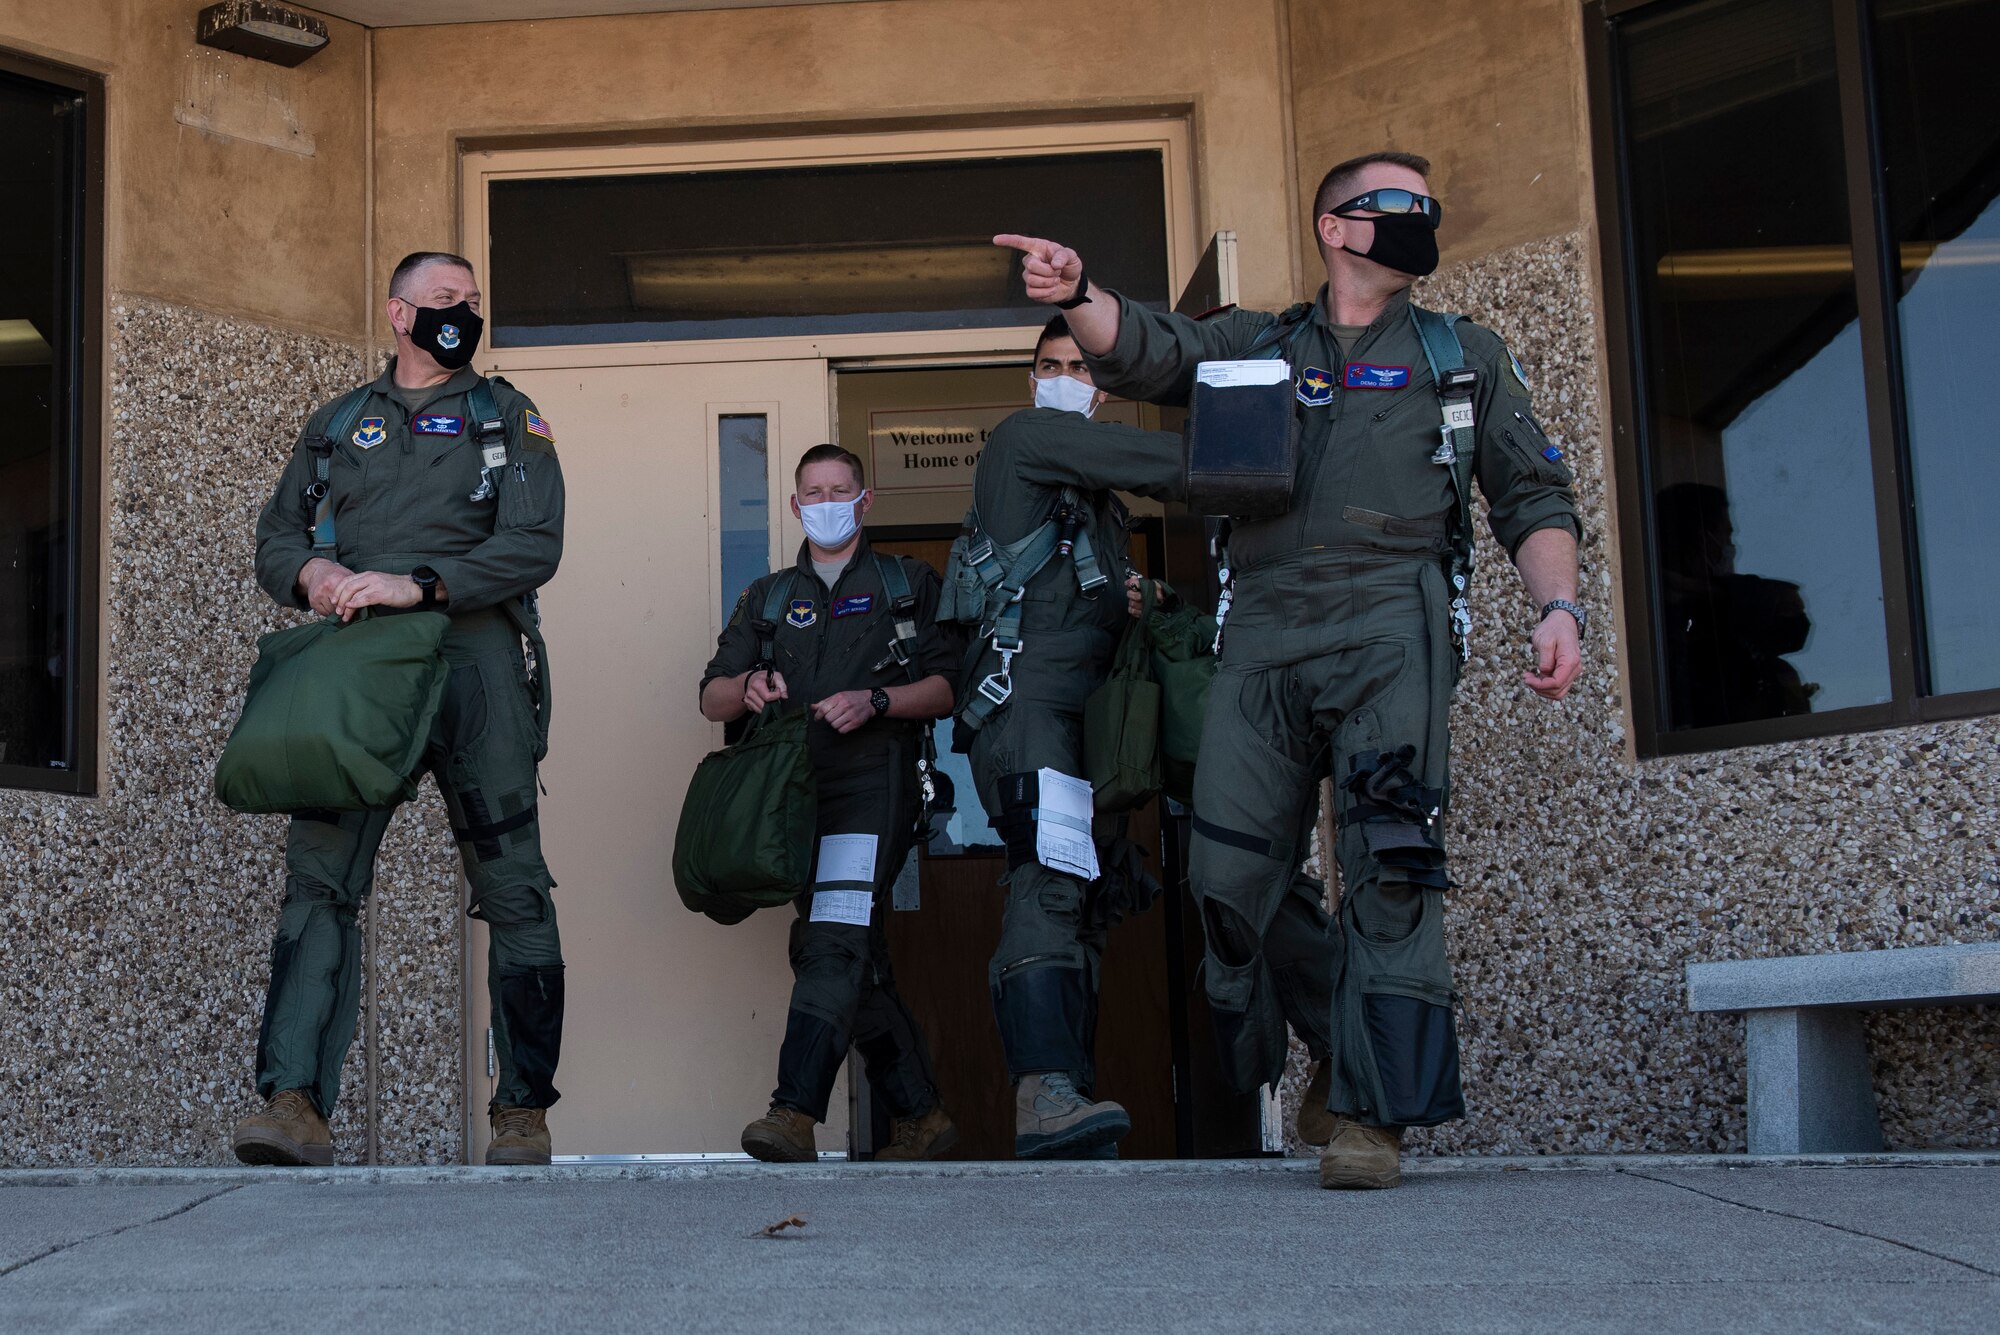 Maj. Gen. William Spangenthal, Air Education and Training Command deputy commander, and his sortie team walk out to their aircraft to take flight at Laughlin Air Force Base, Texas, Feb 9, 2021. The T-6 is the first aircraft student pilots fly, before specializing in either the T-1 Jayhawk or the T-38C Talon. (U.S. Air Force photo by Airman 1st Class David Phaff)